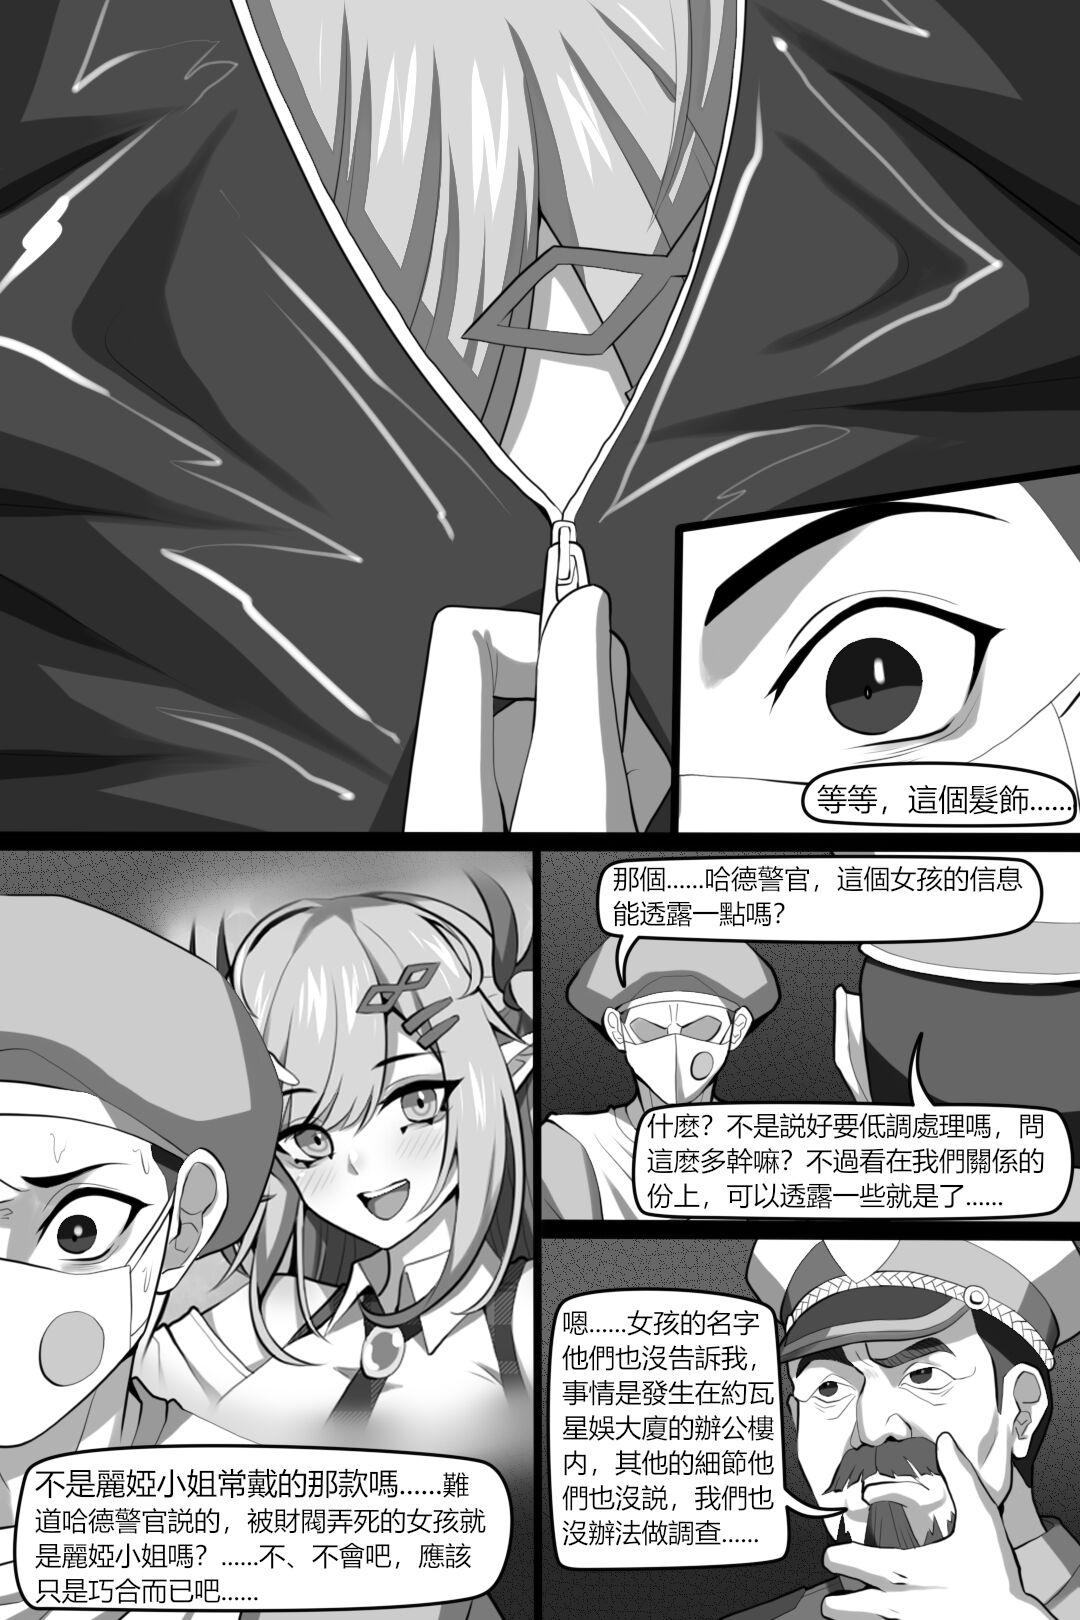 Puta Bin Lian City Stories Chapter 3: Corrupted Forensic - Original Leather - Page 11